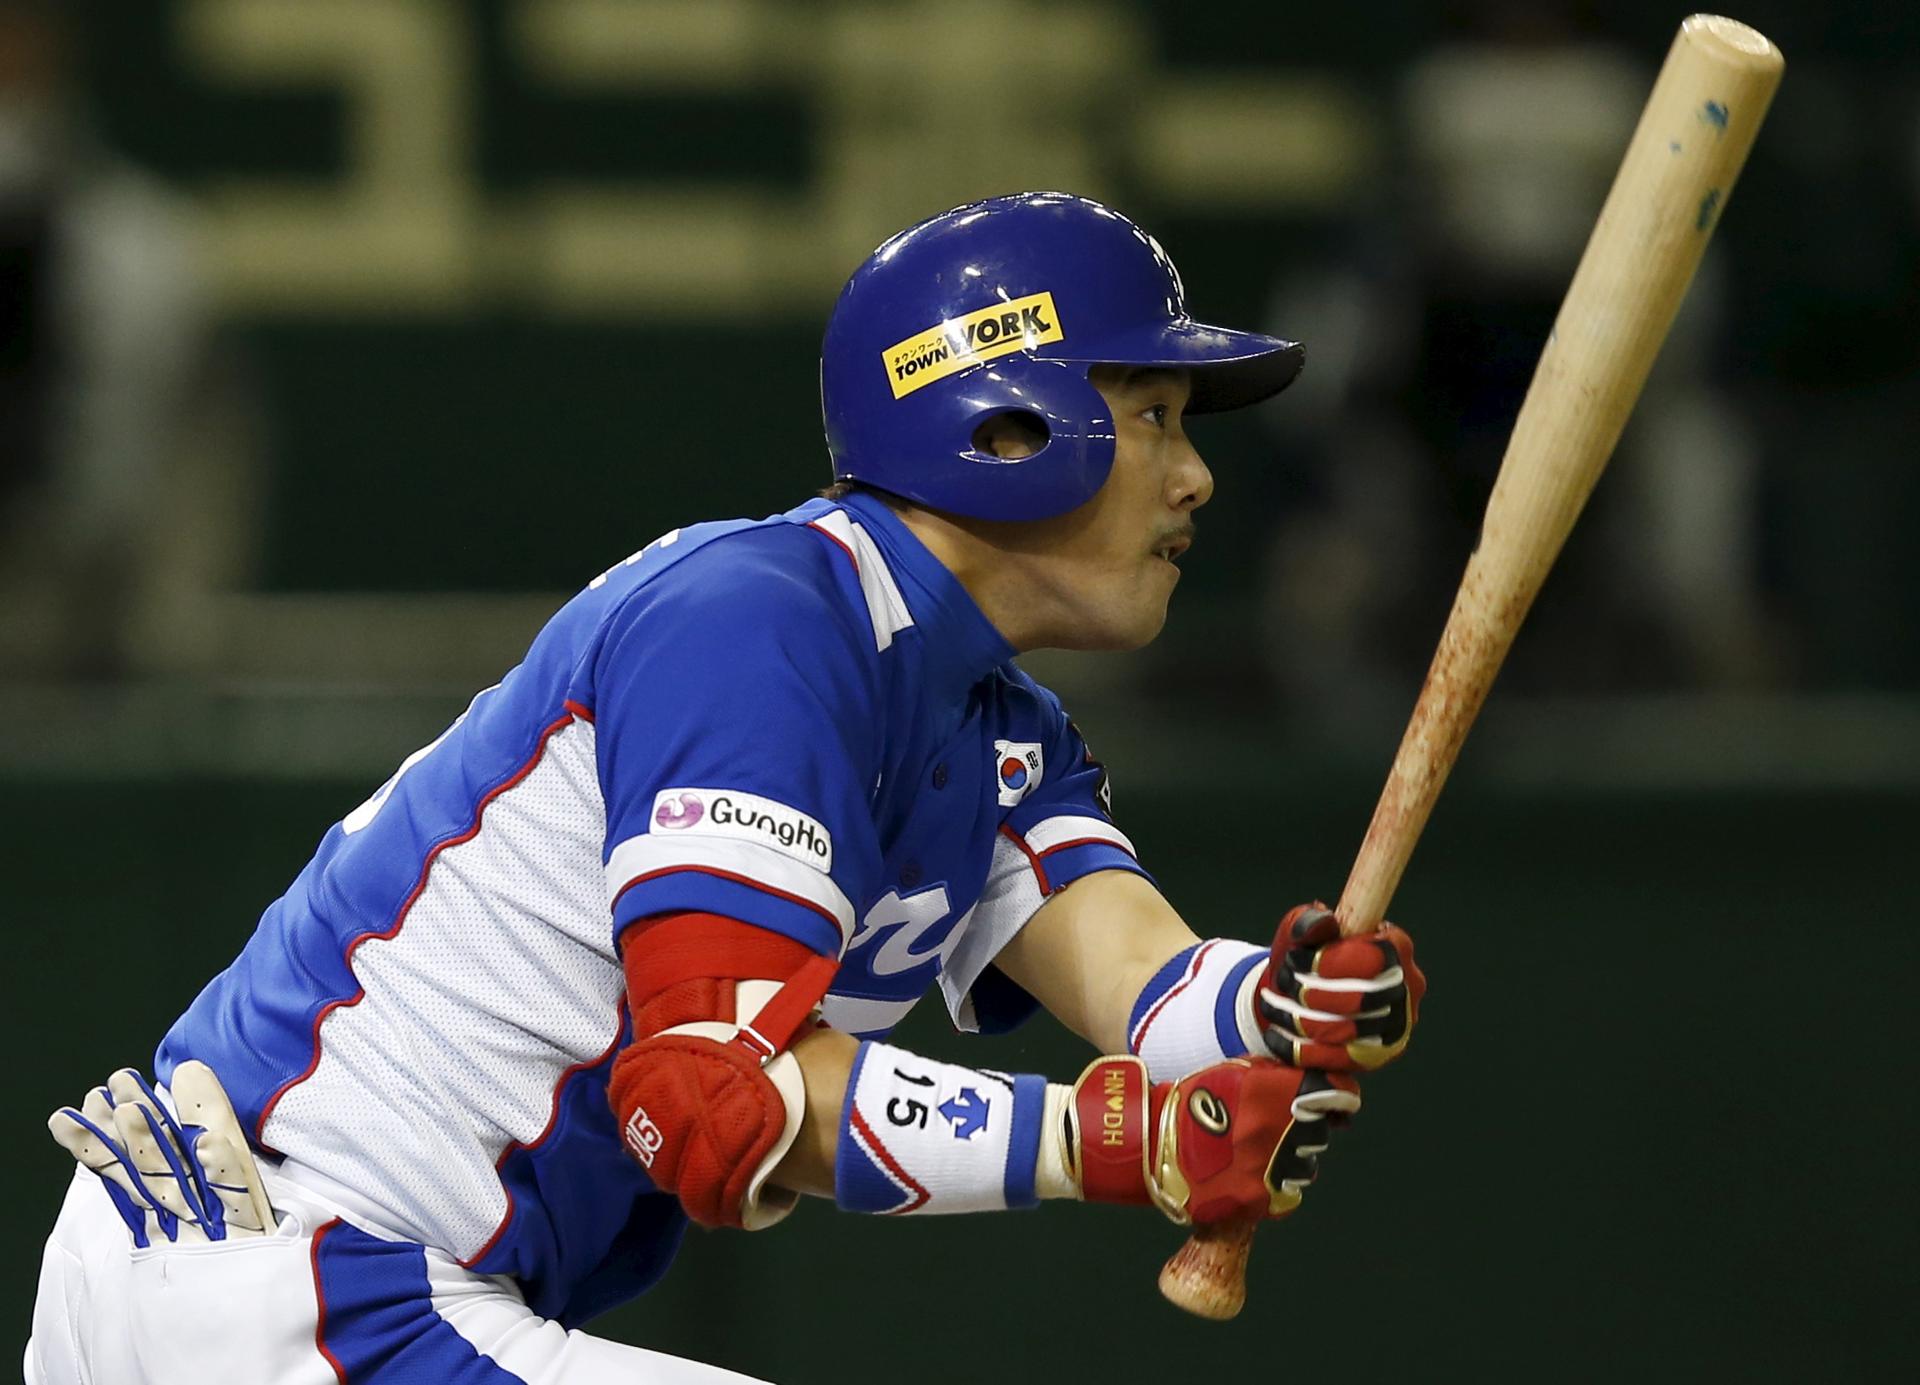 South Korea's Lee Yong-kyu watches the ball after hitting an RBI double at the Premier12 international baseball tournament at Tokyo Dome in 2015. 